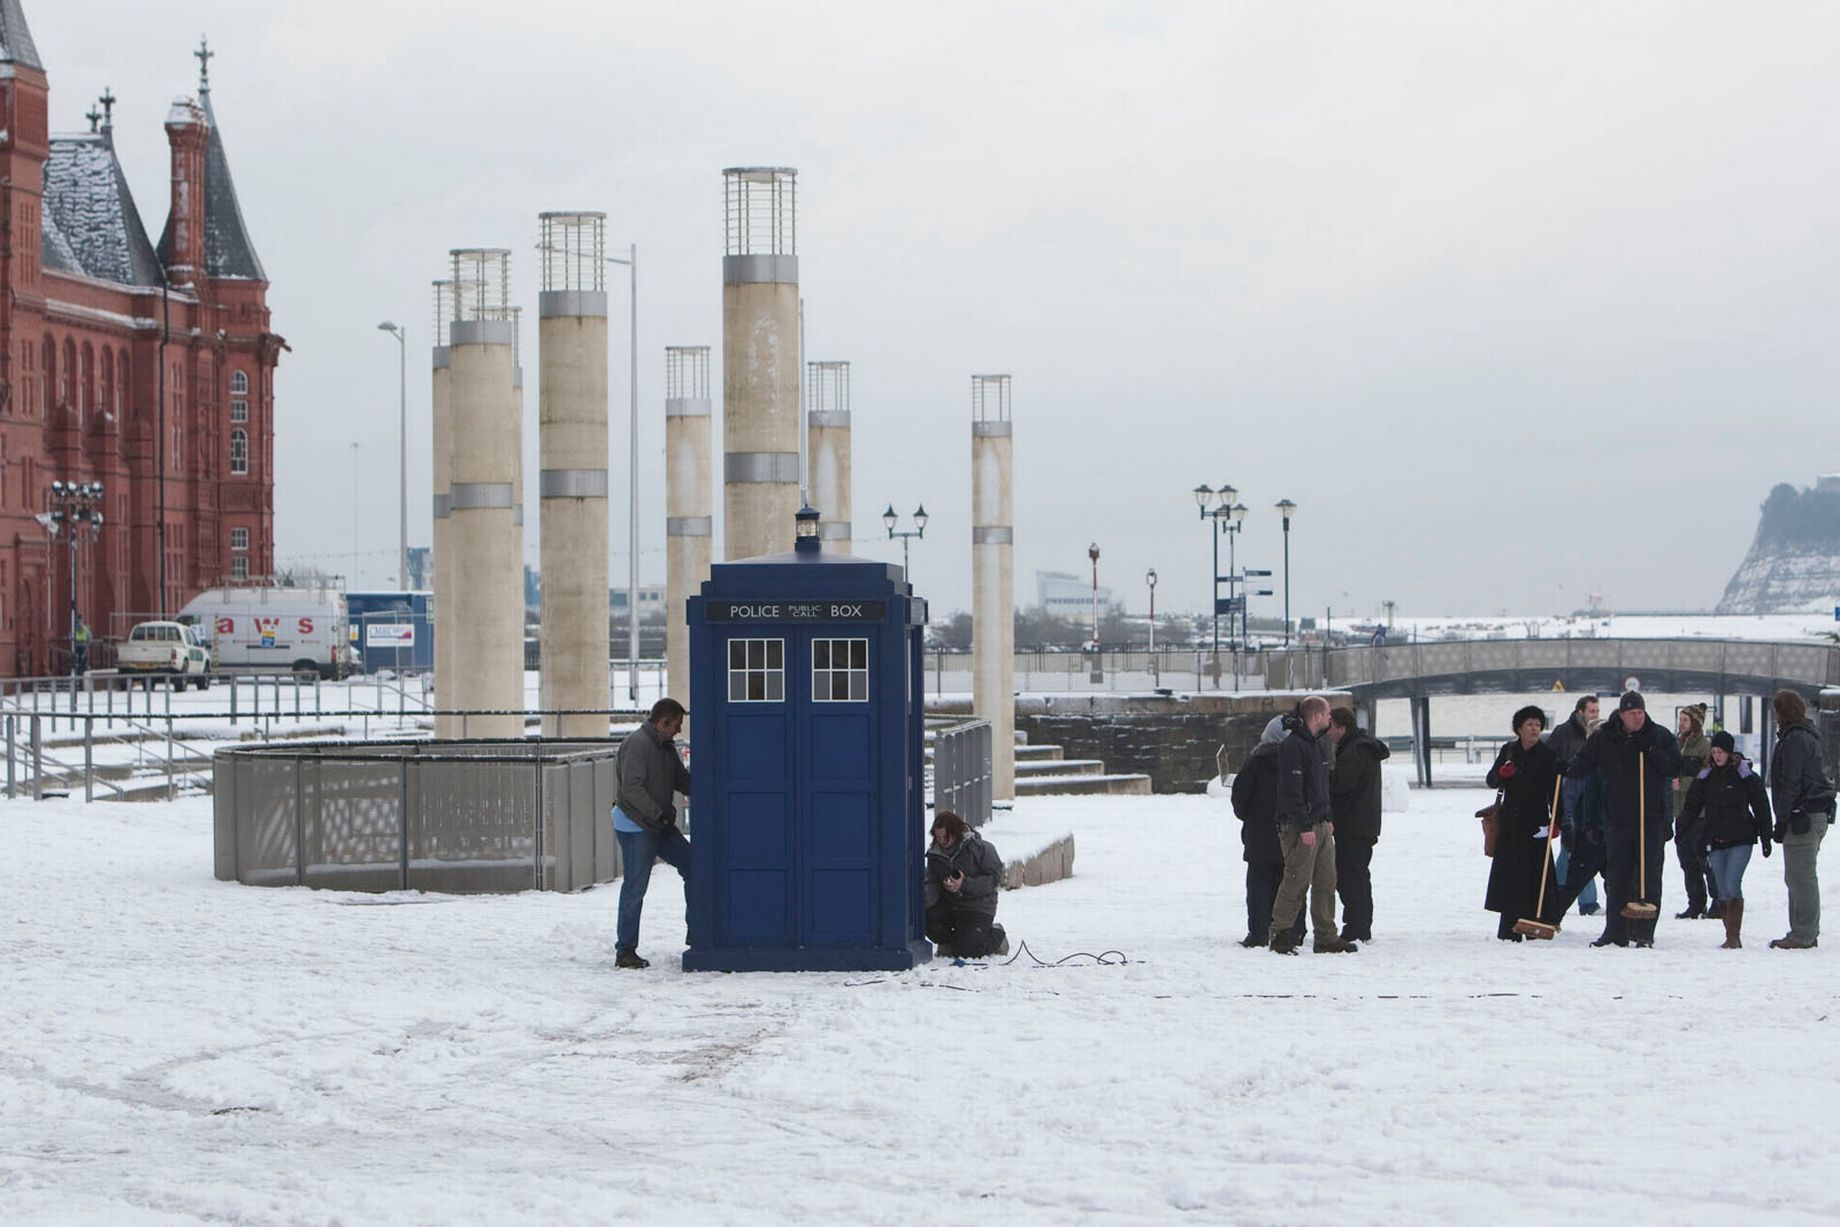 Dr Who filming in Cardiff Bay